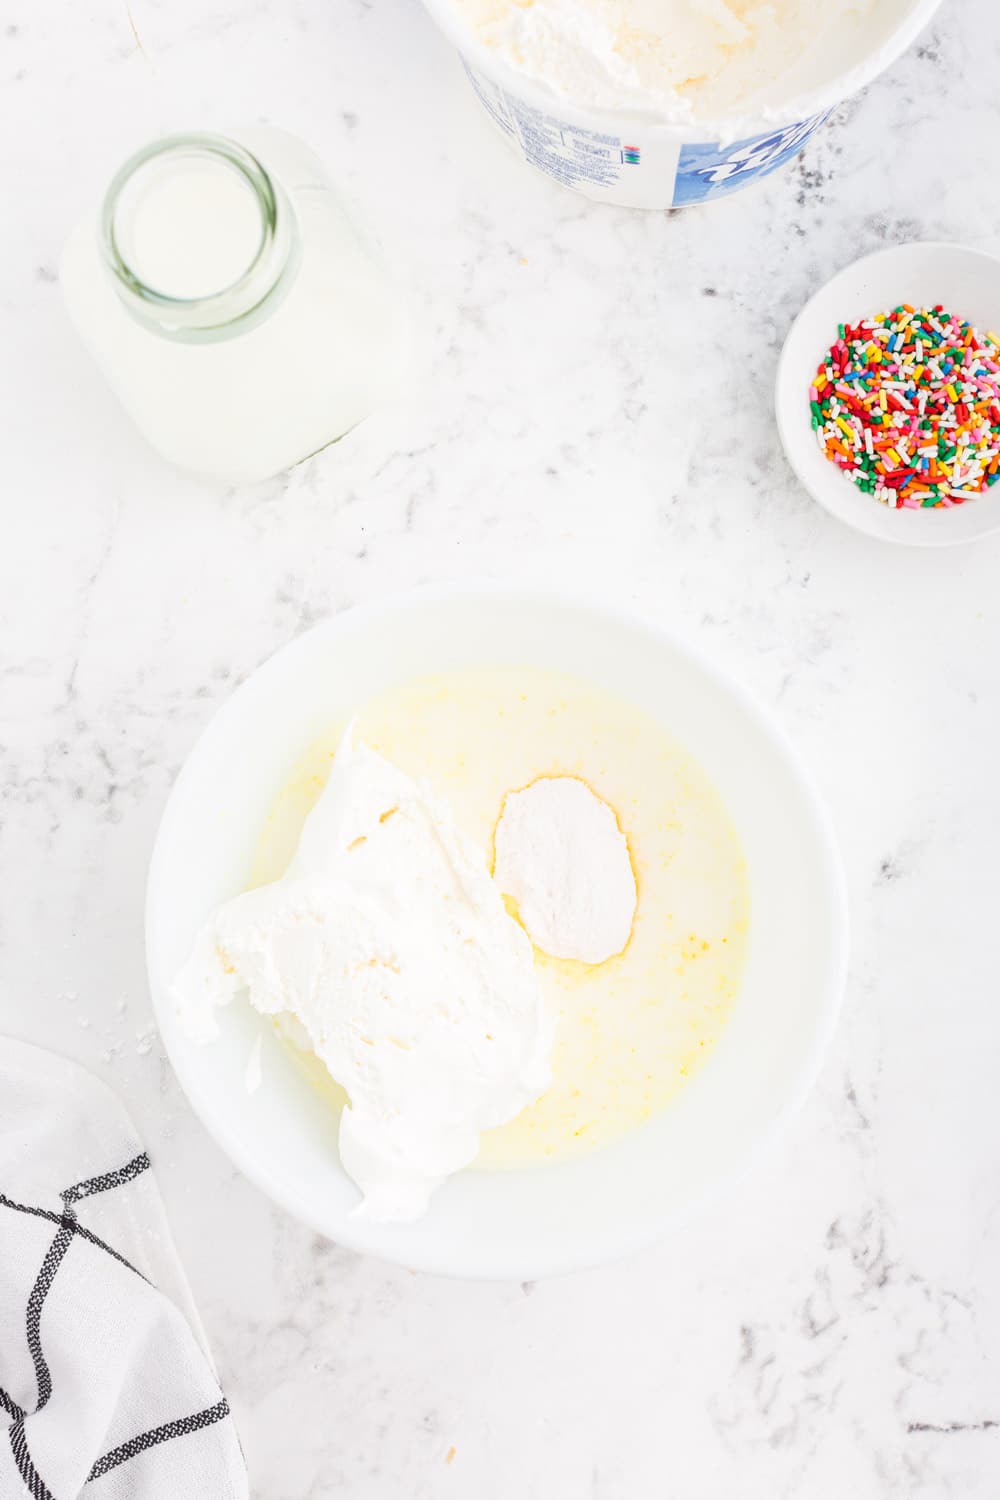 Mixing bowl with vanilla instant pudding mix, milk, and whipped topping, small bowl of rainbow sprinkles, glass jar of milk, striped linen, on a white marble surface.